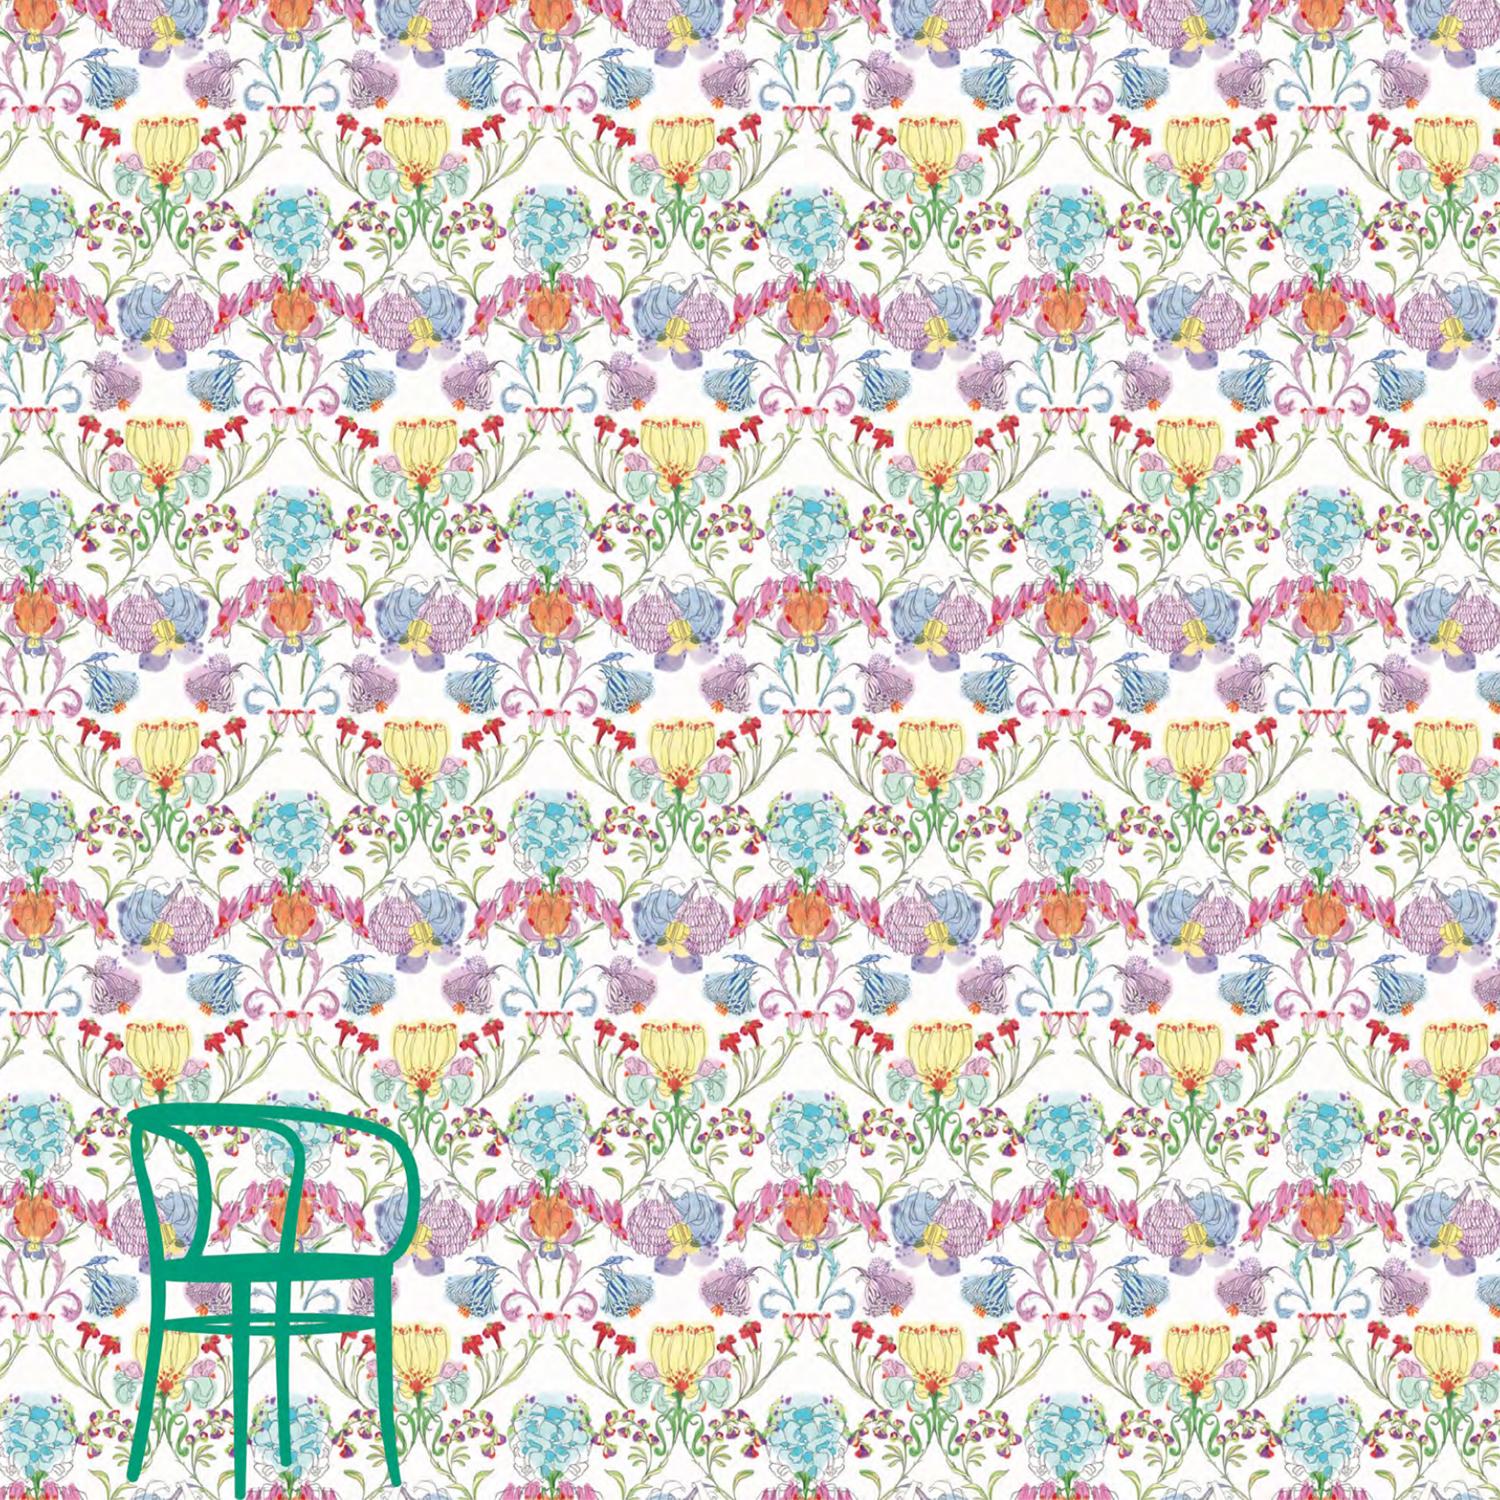 The Grandma's Garden wall covering is realized on a soft touch tnt base and it is a contemporary reinterpretation of a classic ornamental design. Characterized by light and bright colors, it represents spring gardens in full bloom with buds, petals